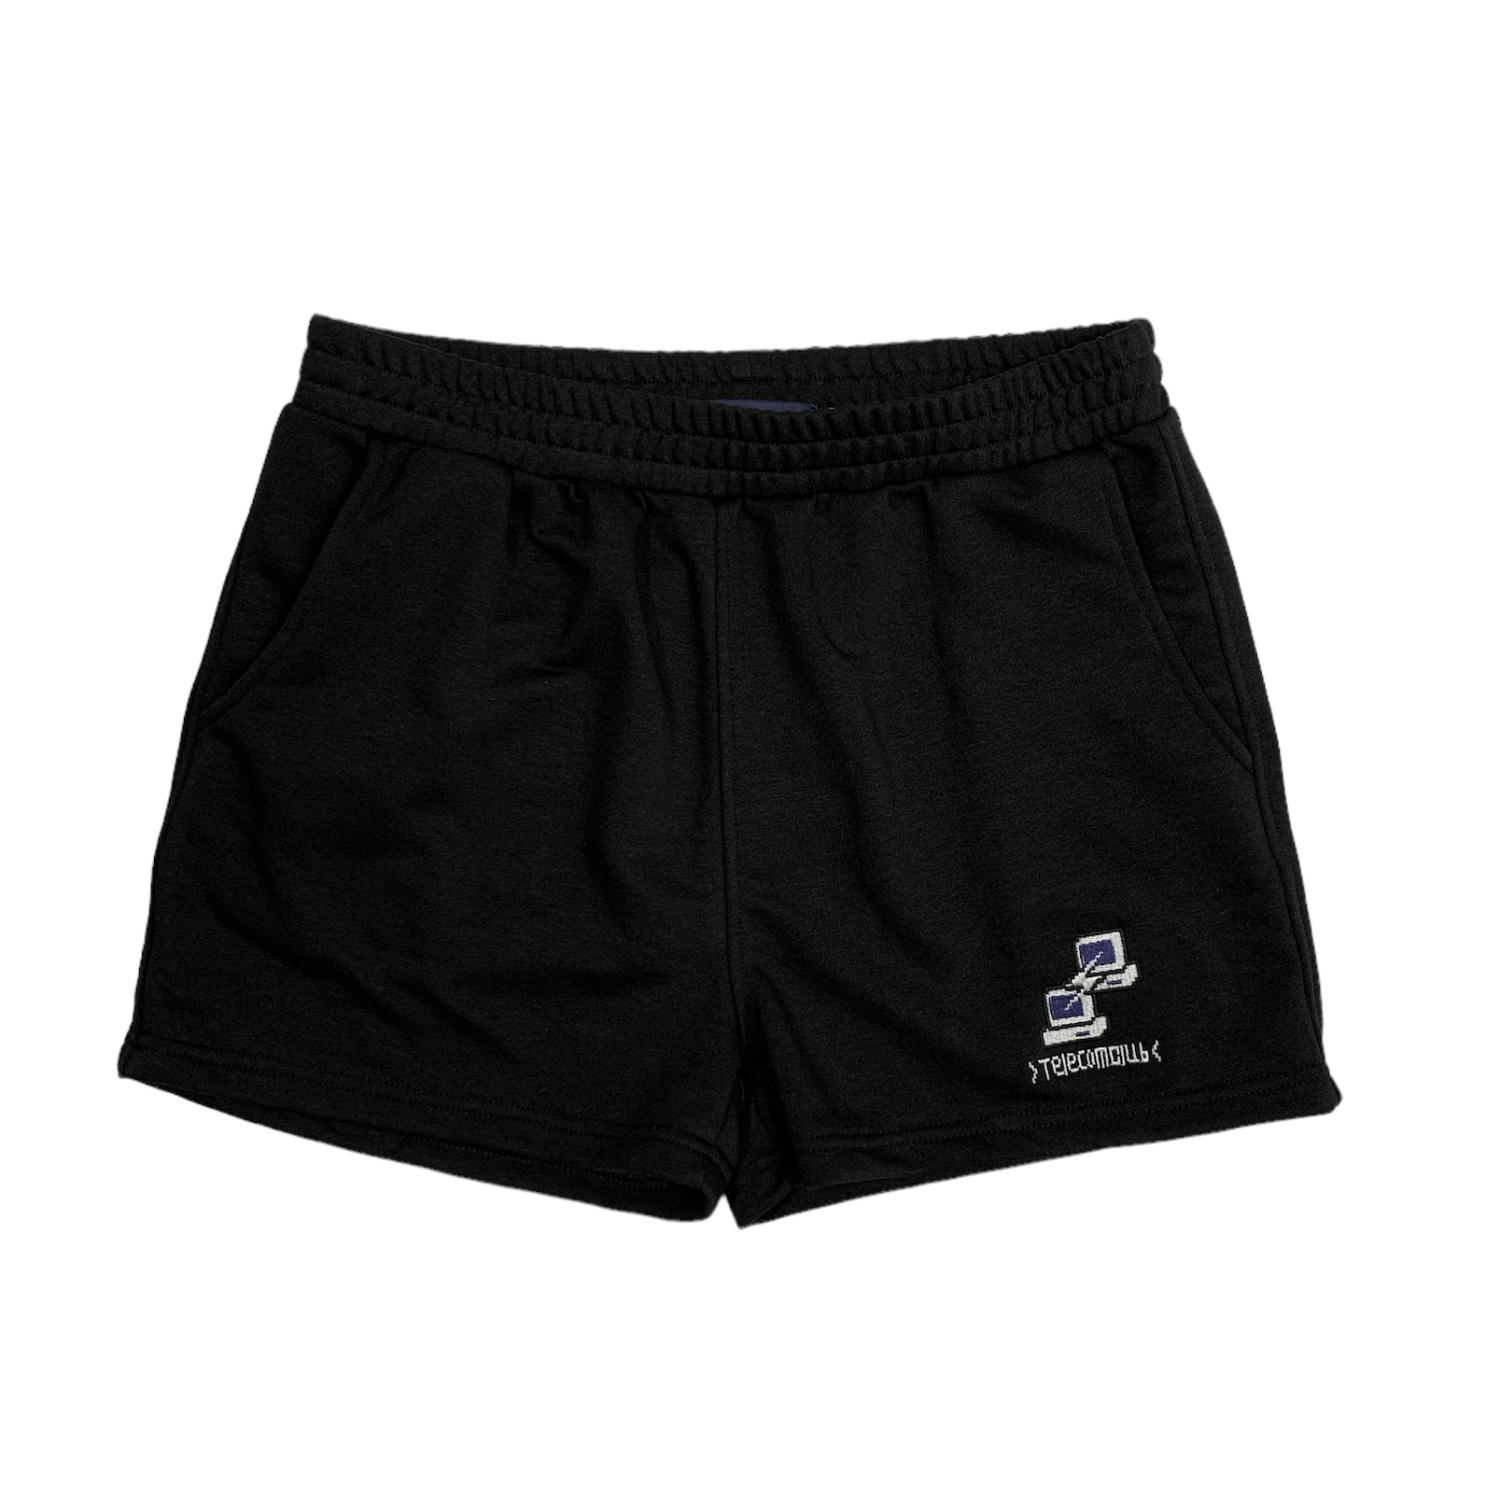 I AM CONNECTED SHORTS (BLACK)